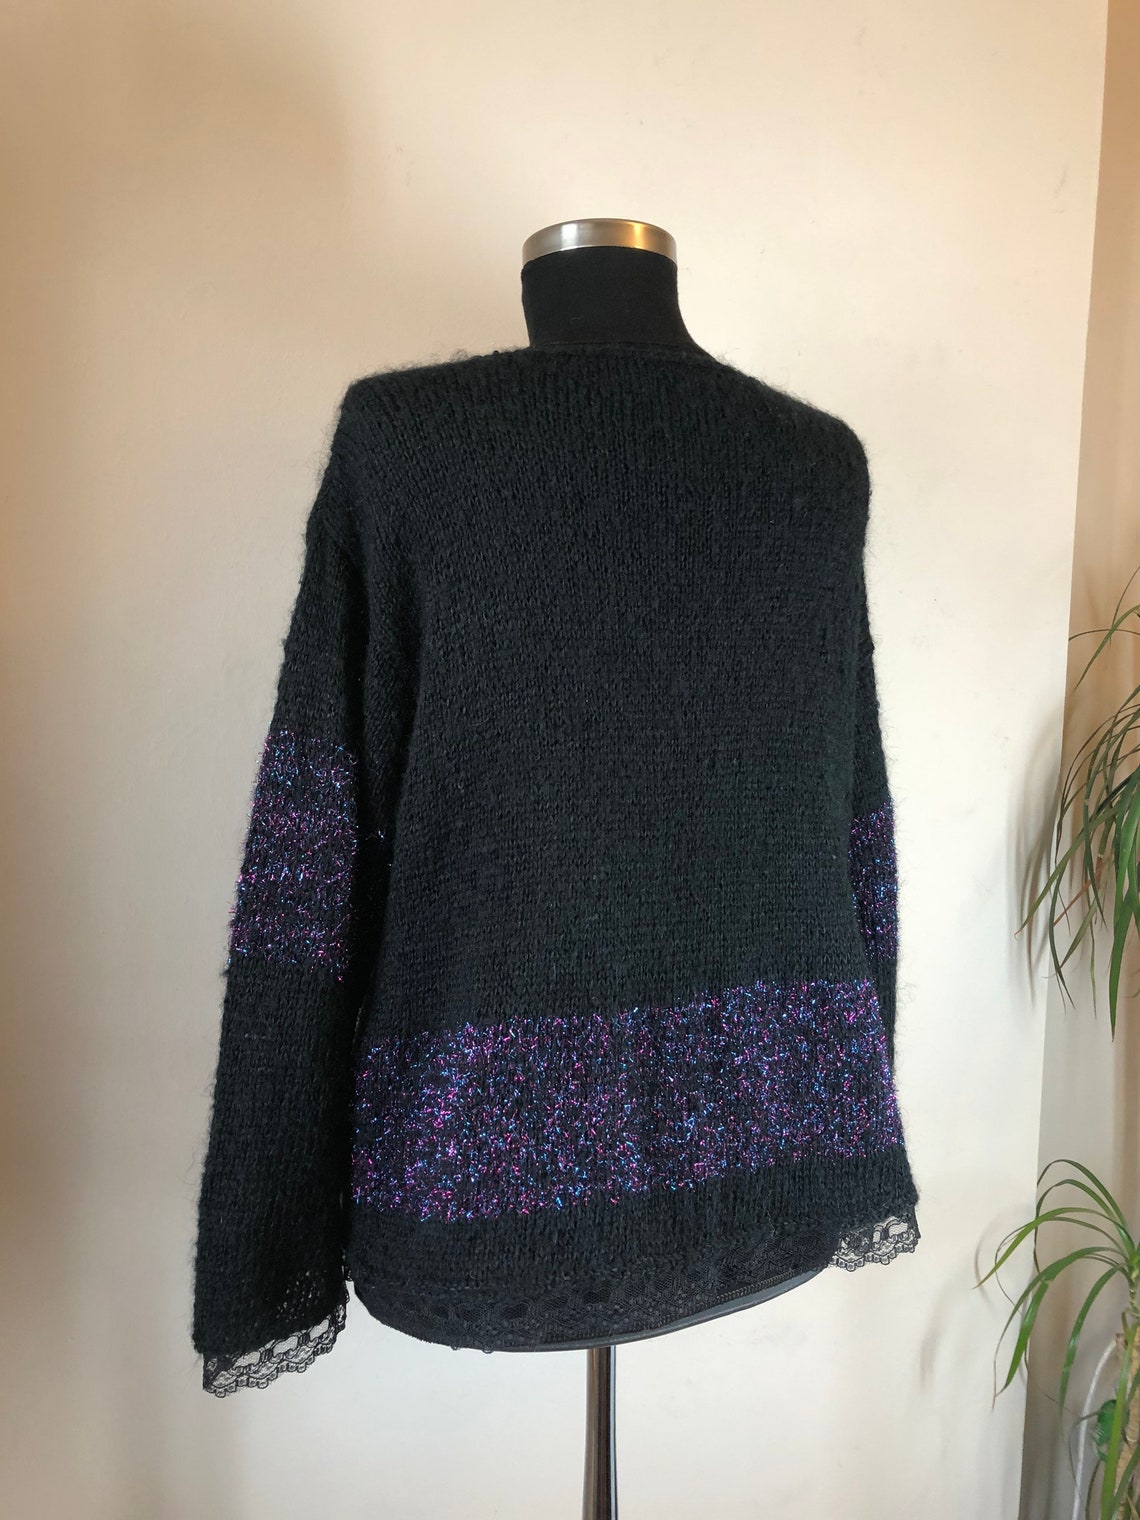 Black Mohair Wool Sweater Hand Knit Oversized Sweater Laced - Etsy UK